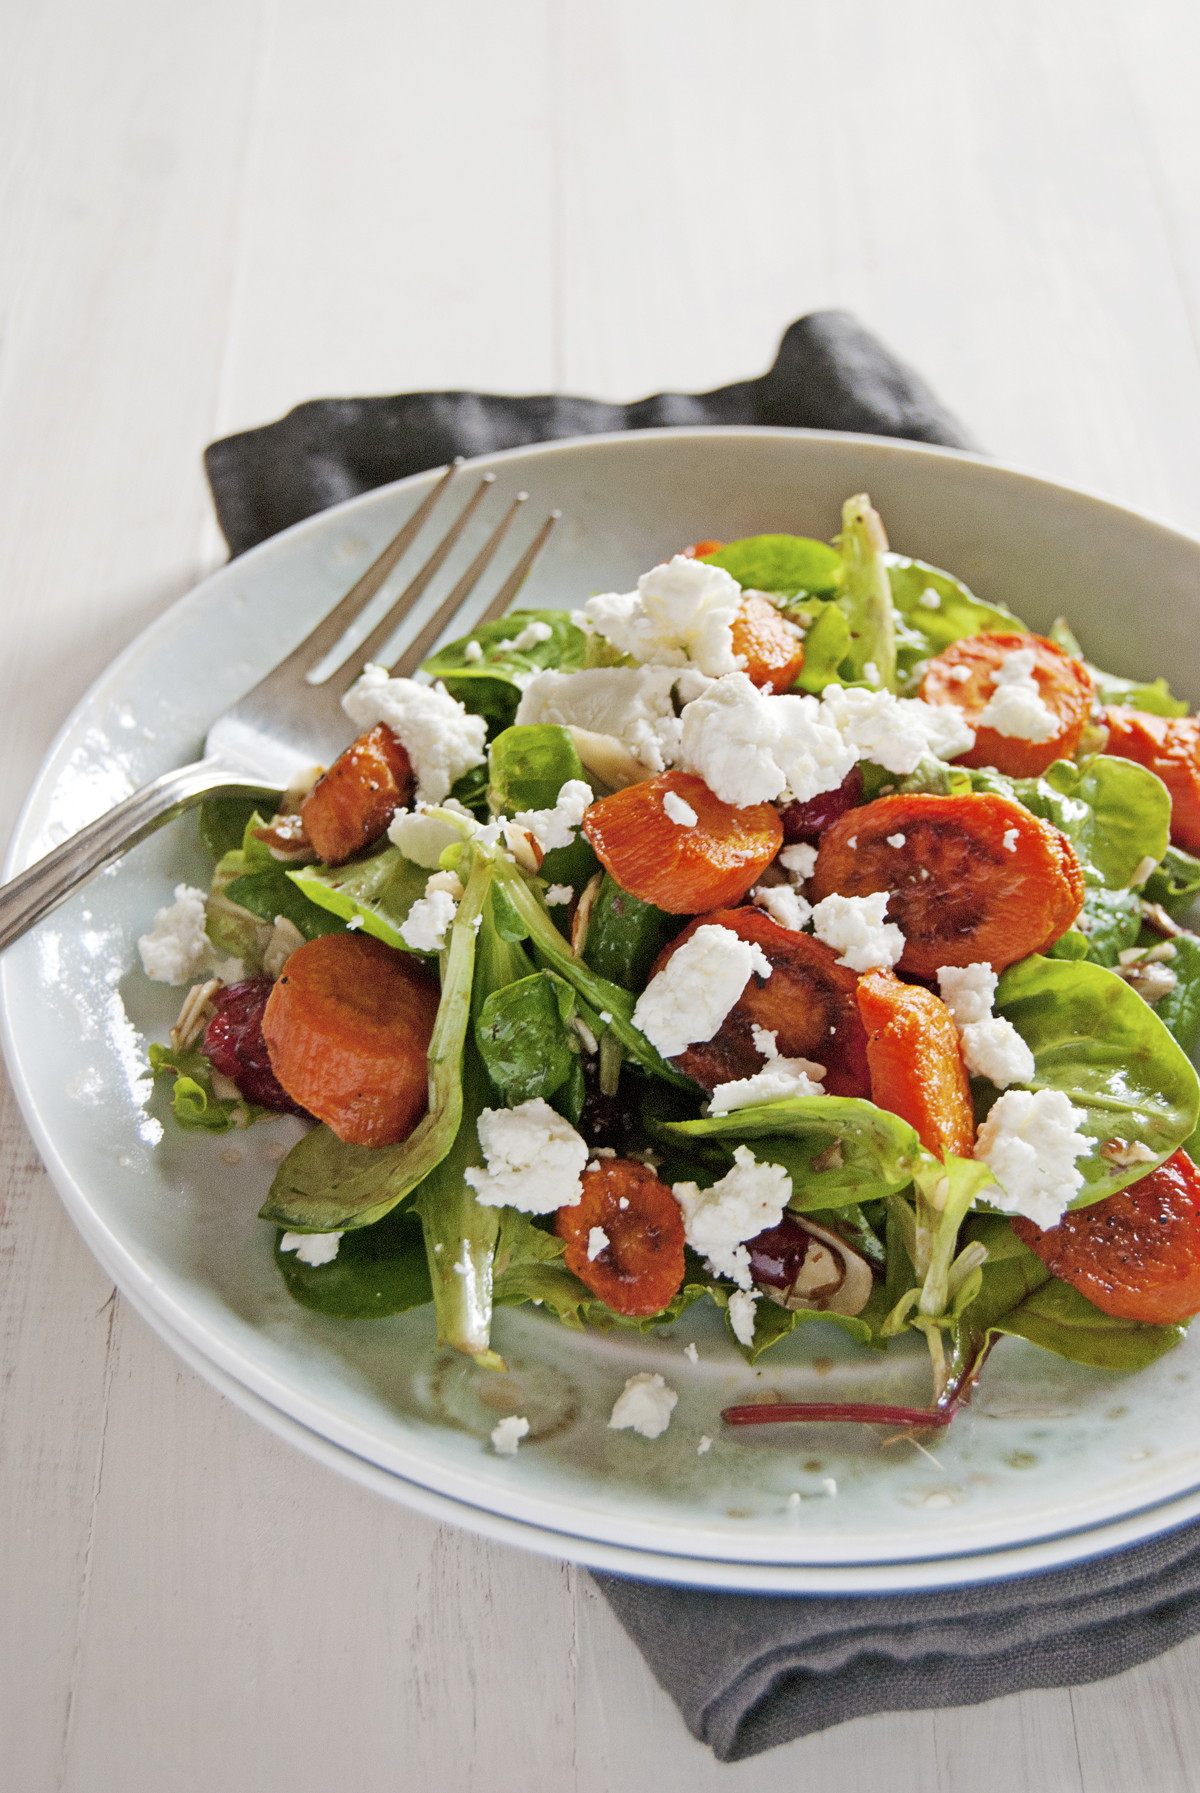 Say hello to the fall with this roasted carrot salad, featuring a balsamic vinaigrette, greens, and crumbled goat cheese.